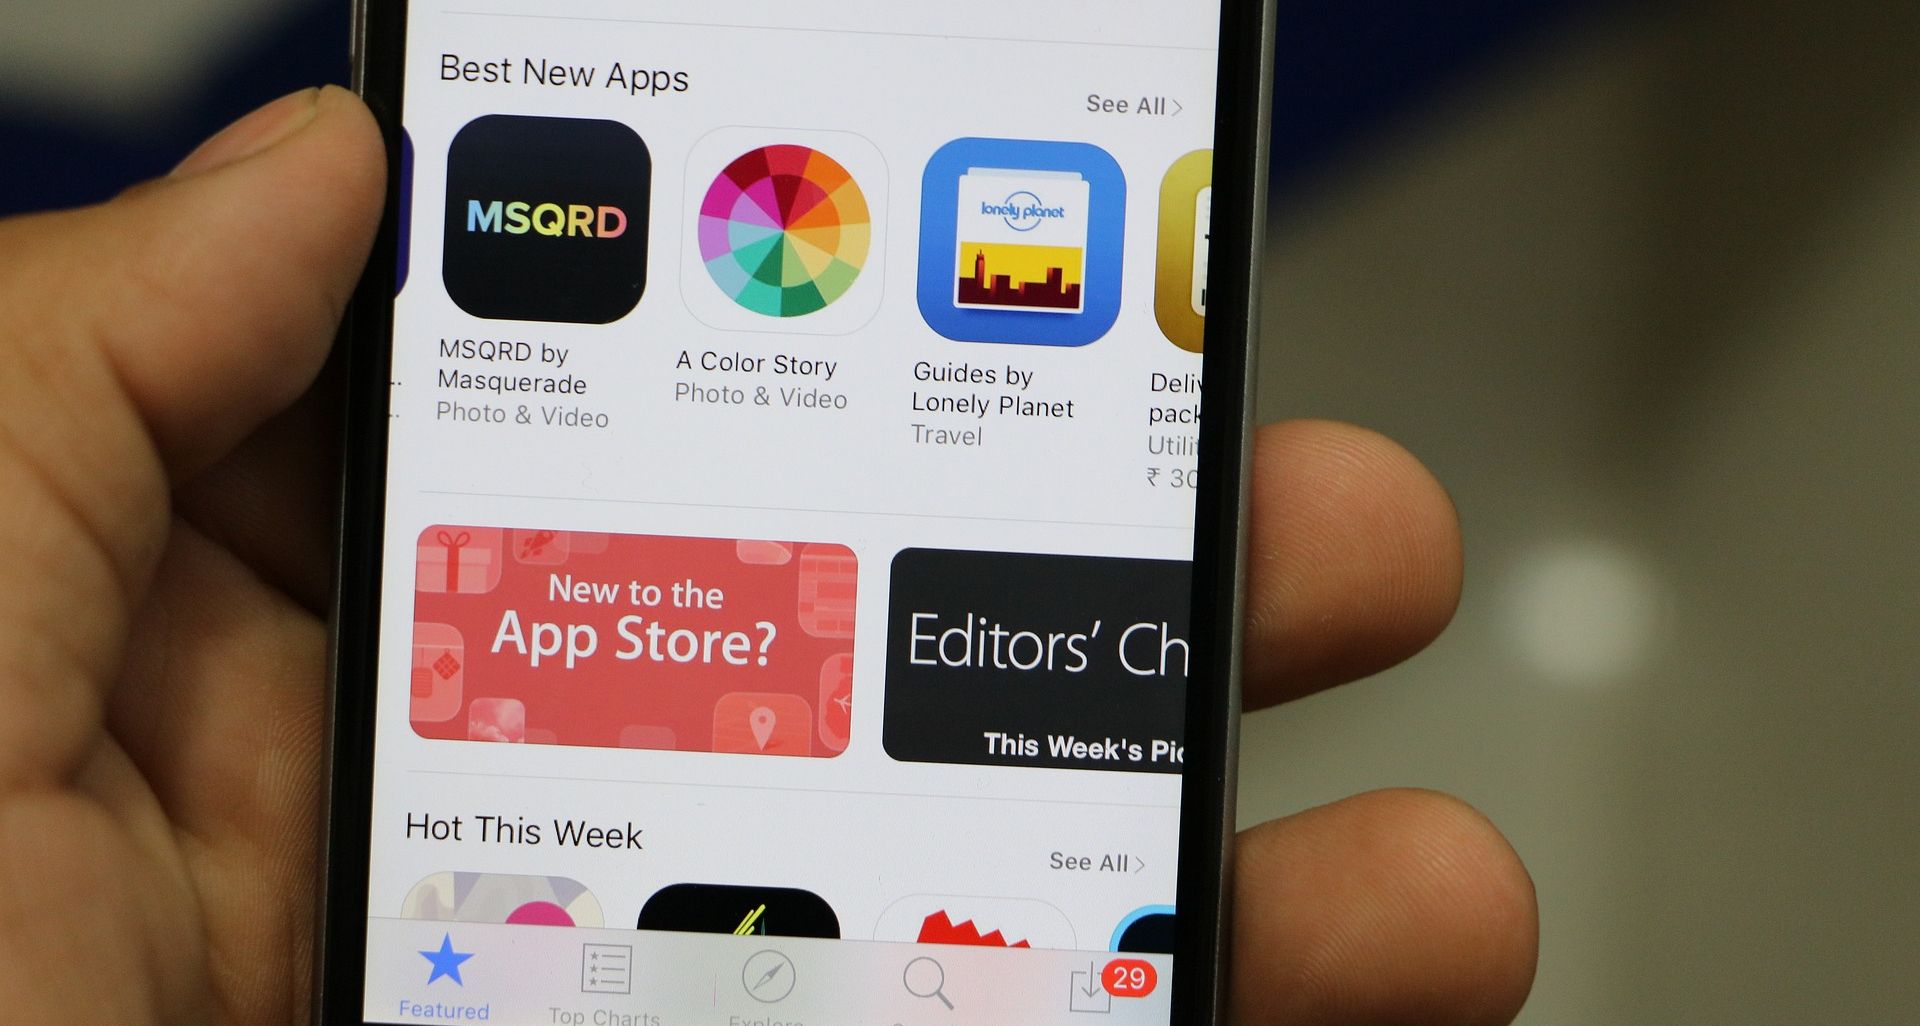 app store application open on smartphone